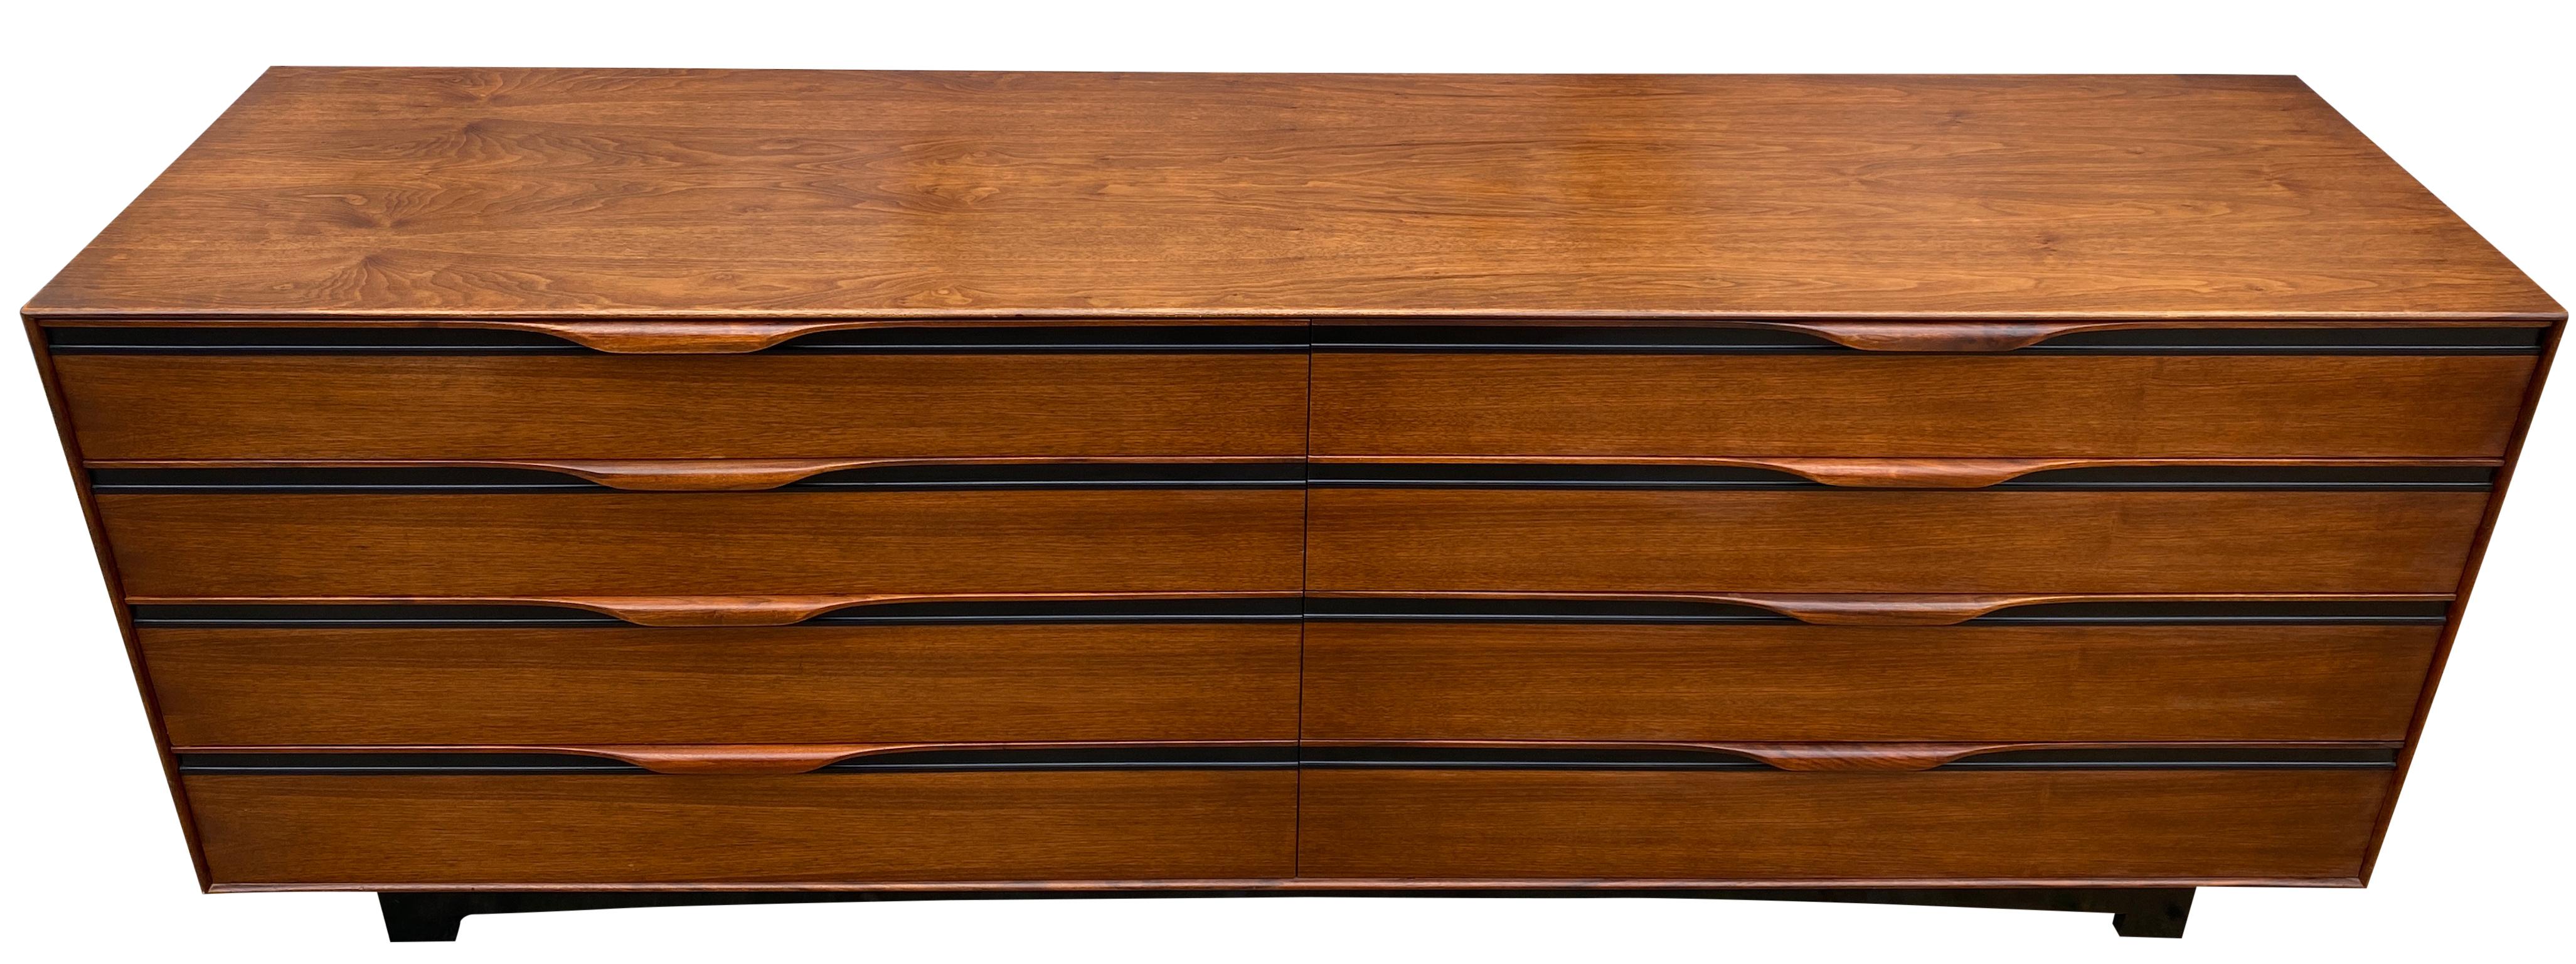 Stunning very clean midcentury John Kapel for Glenn of California long walnut and black lacquer dresser credenza. Very clean all original dresser credenza with all drawer dividers. beautiful sculpted handles. All drawers are on metal glides very